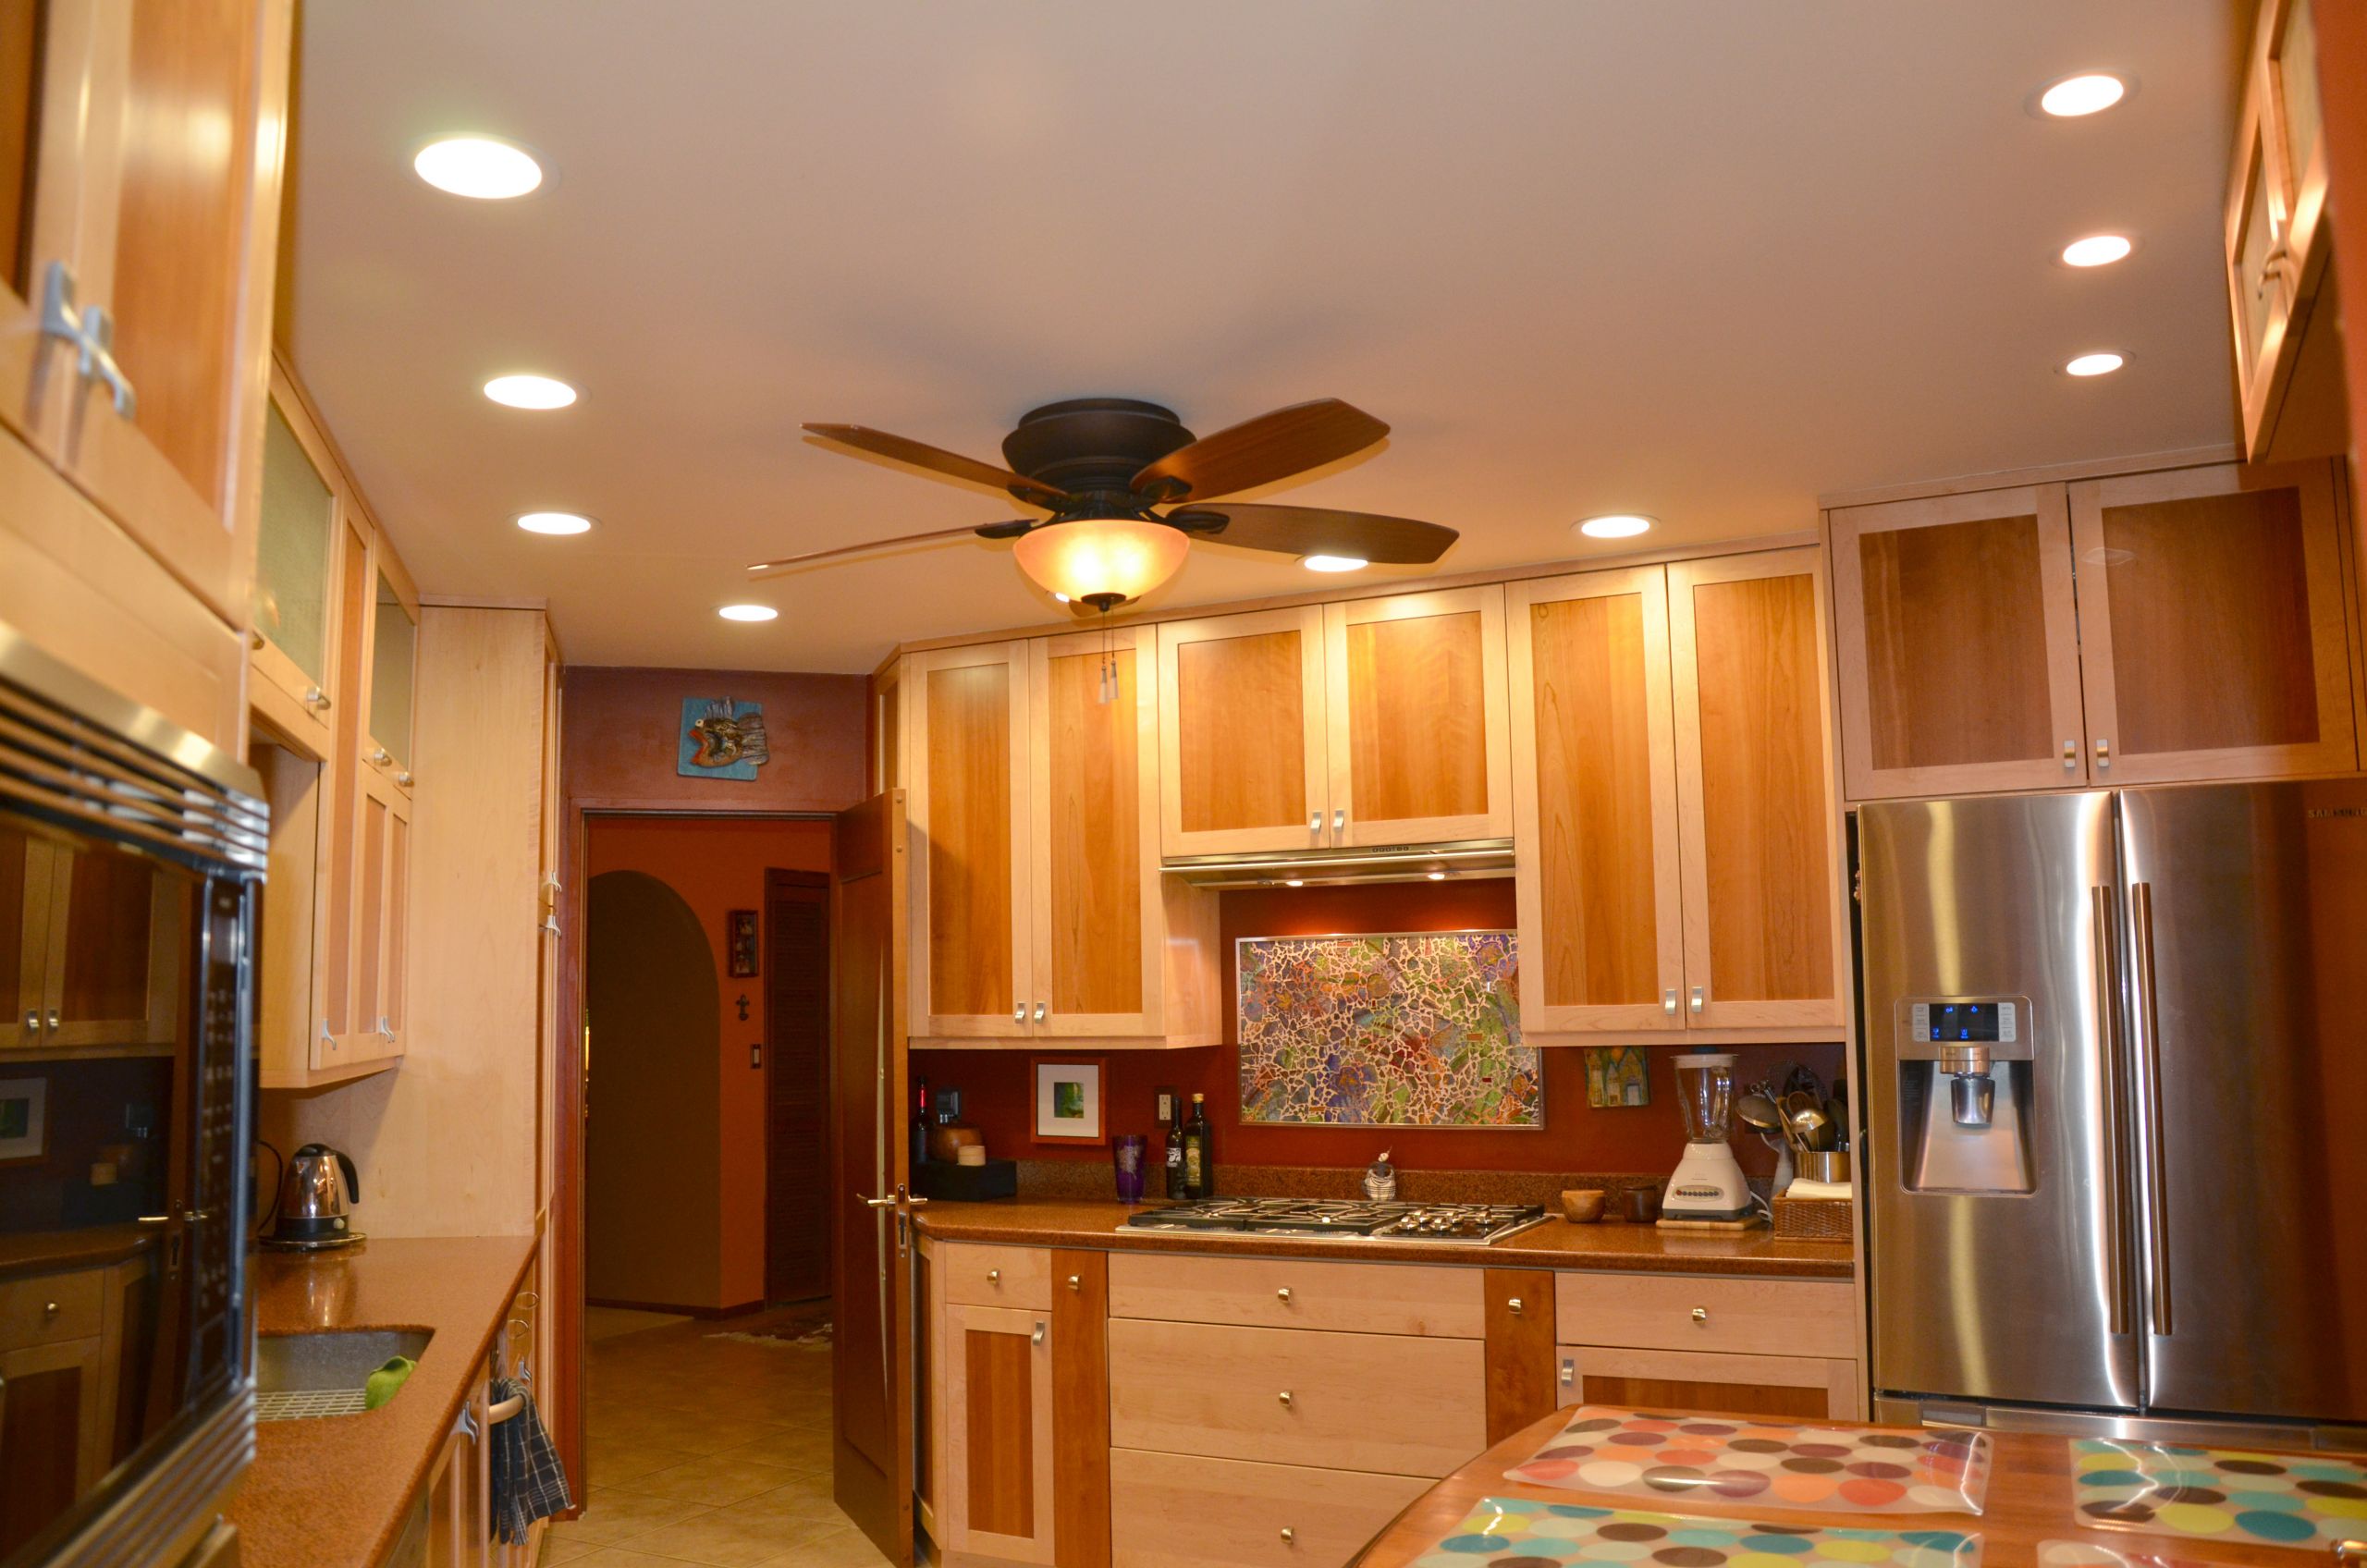 Kitchen Ceiling Lights
 How to Get Your Kitchen Ceiling Lights Right